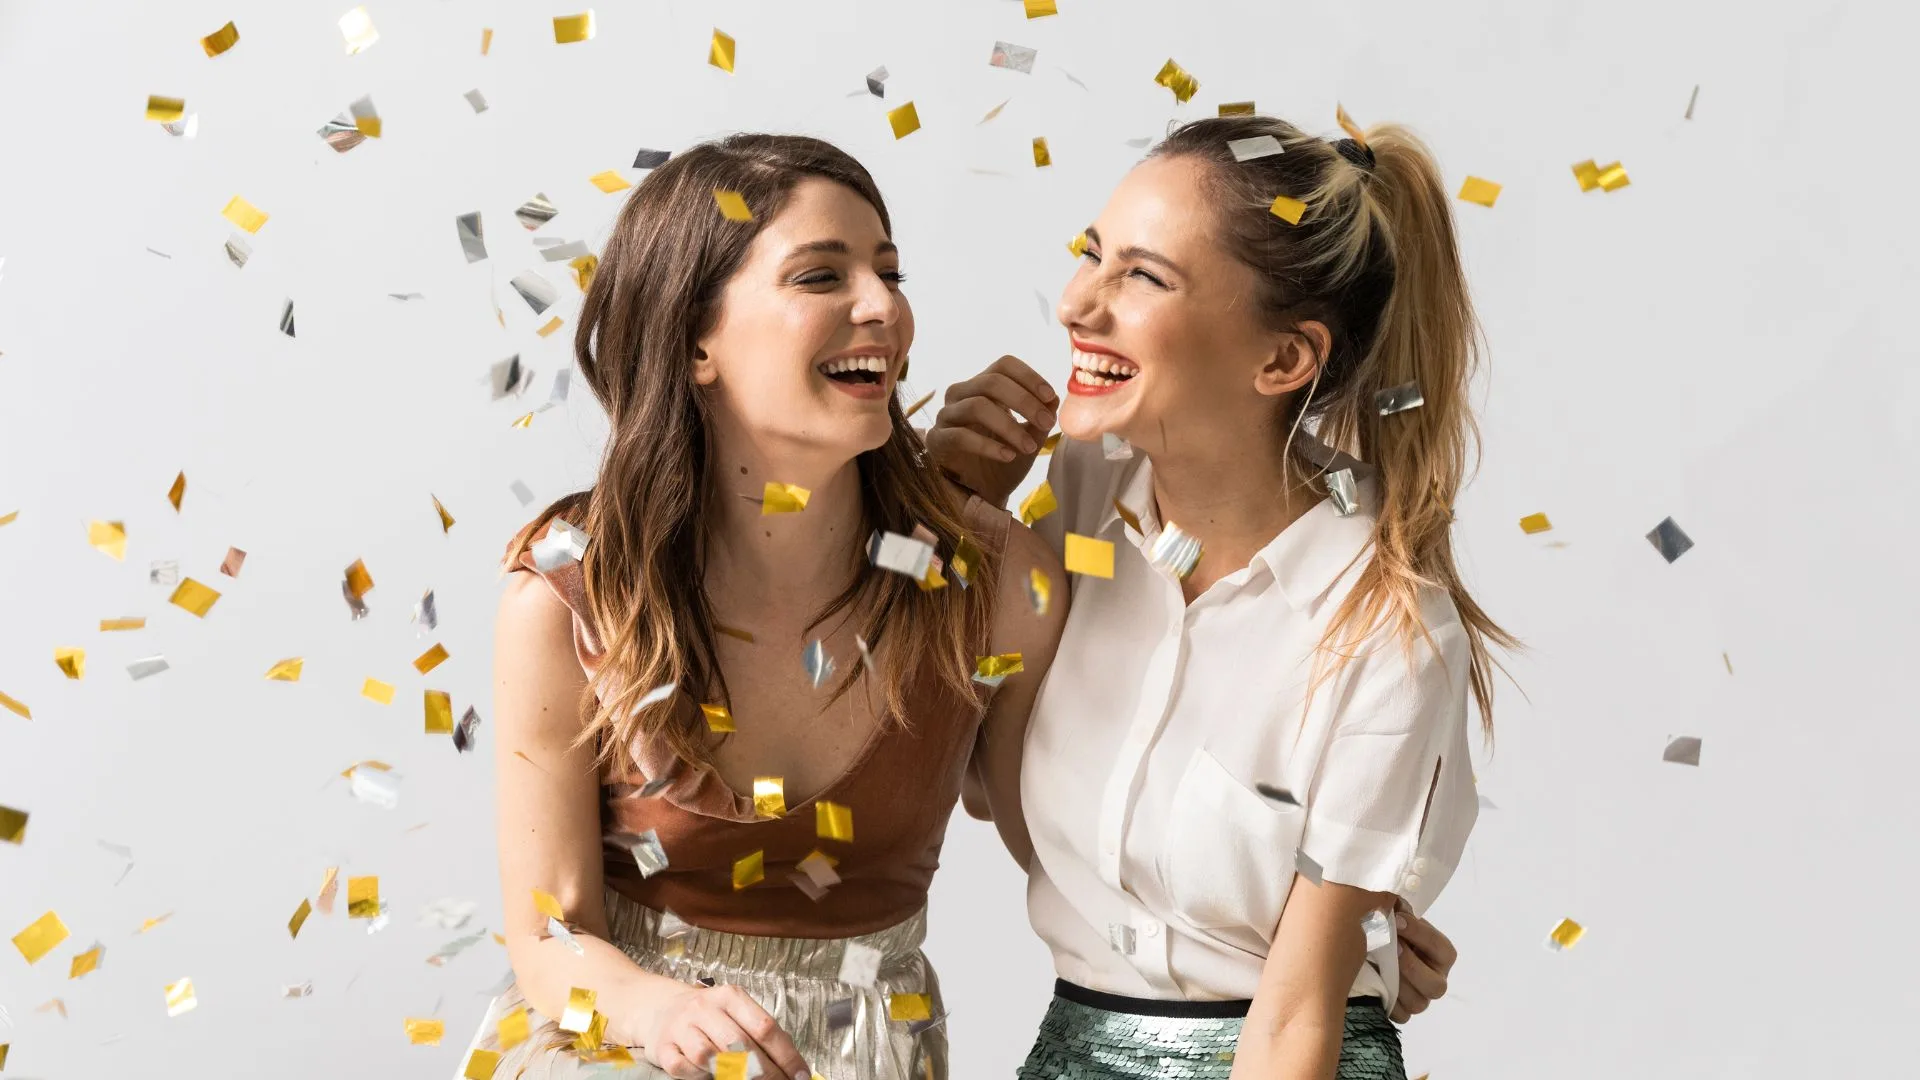 adults celebrate with confetti all the reasons to get braces or Invisalign in the new year